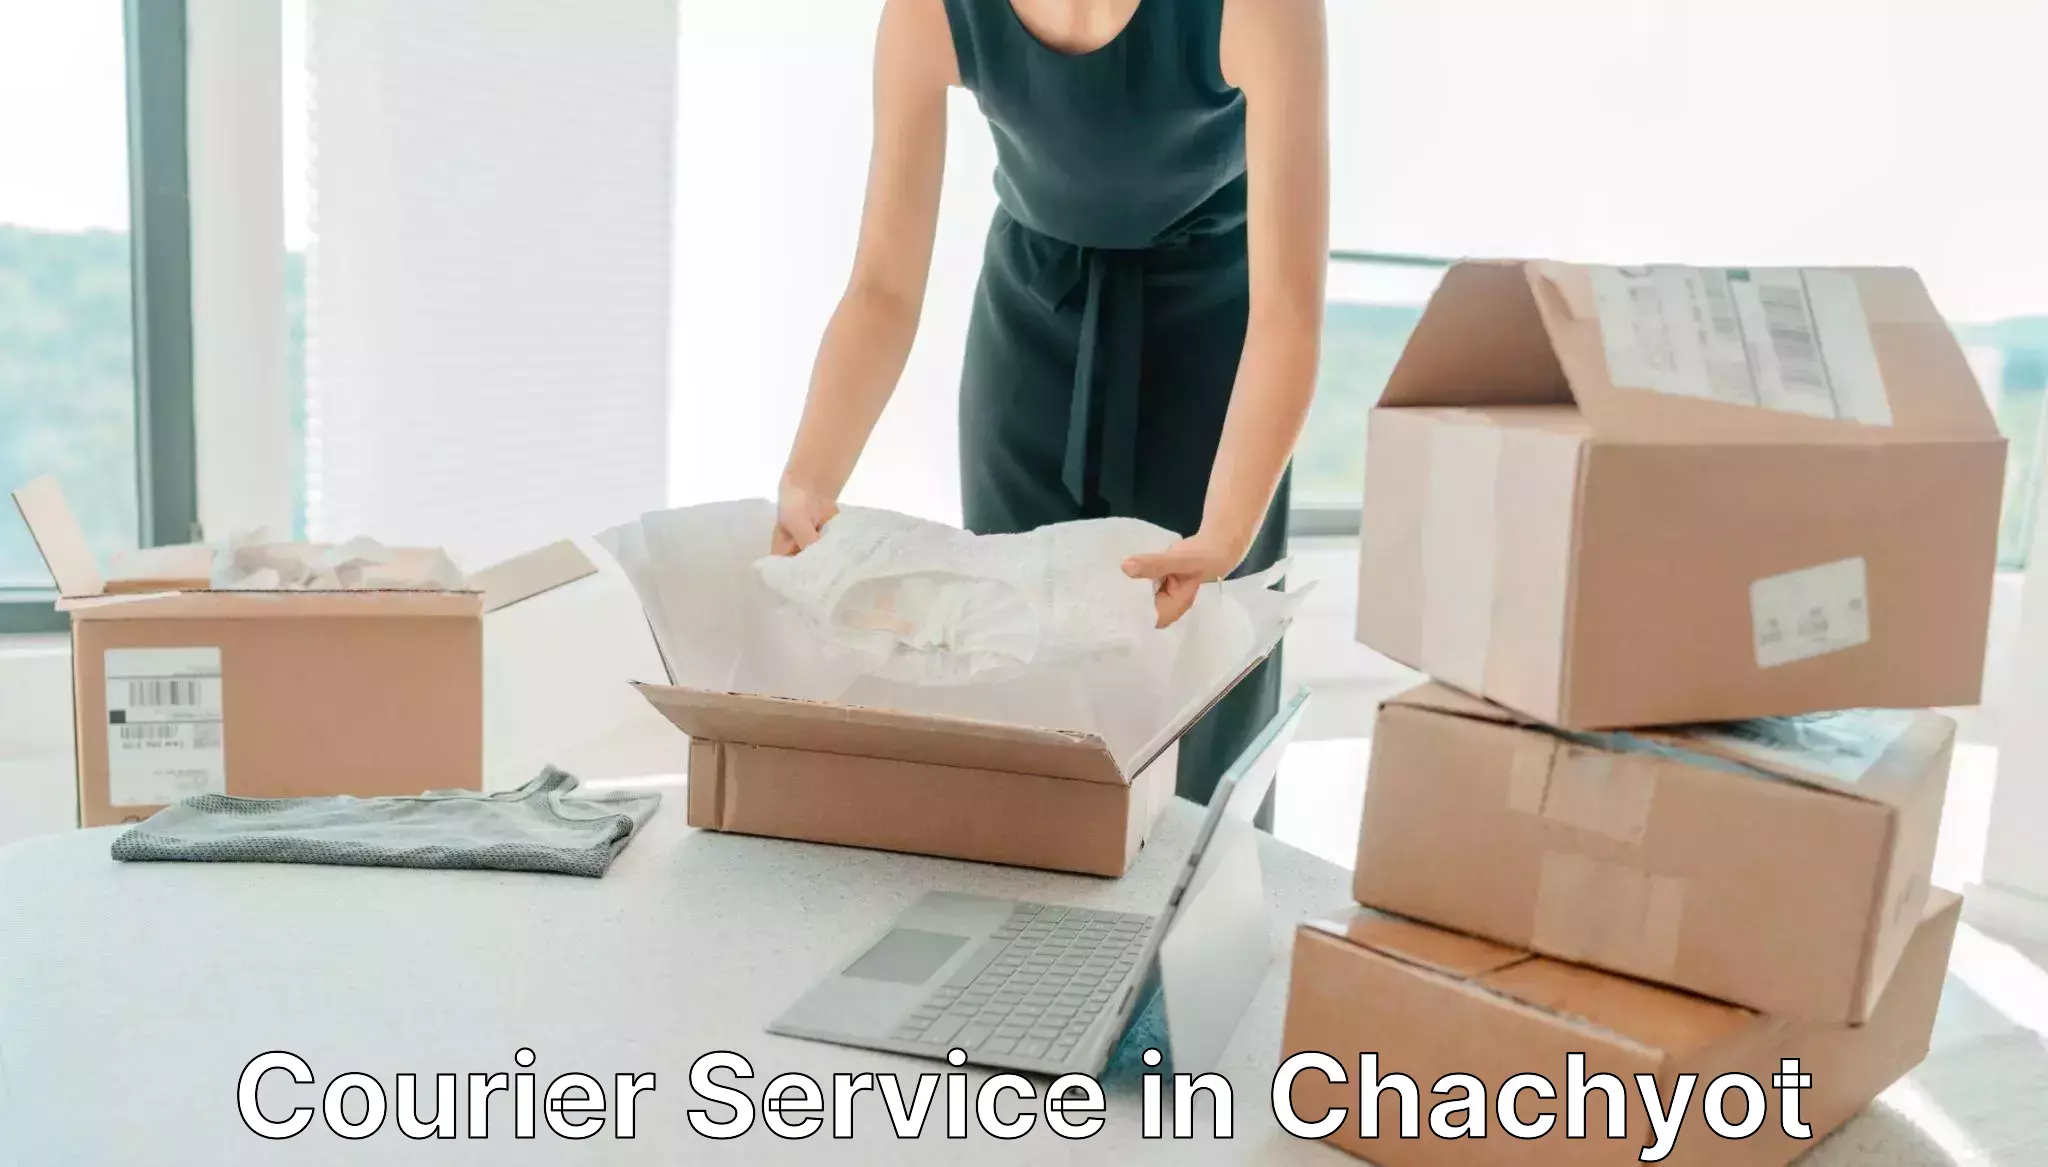 24/7 courier service in Chachyot